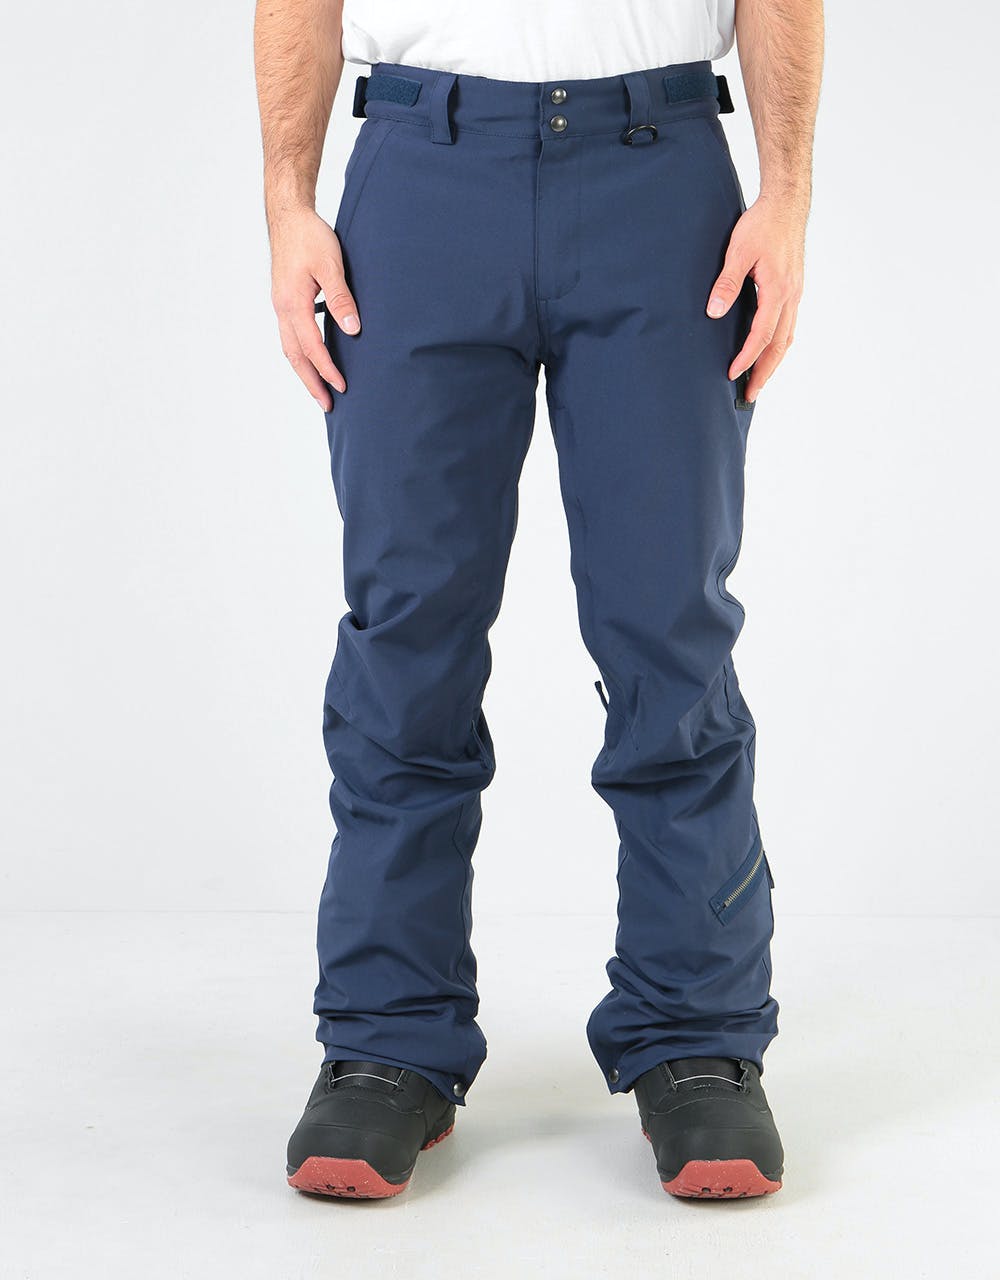 Sessions Hammer 2020 Snowboard Pants - Marriner